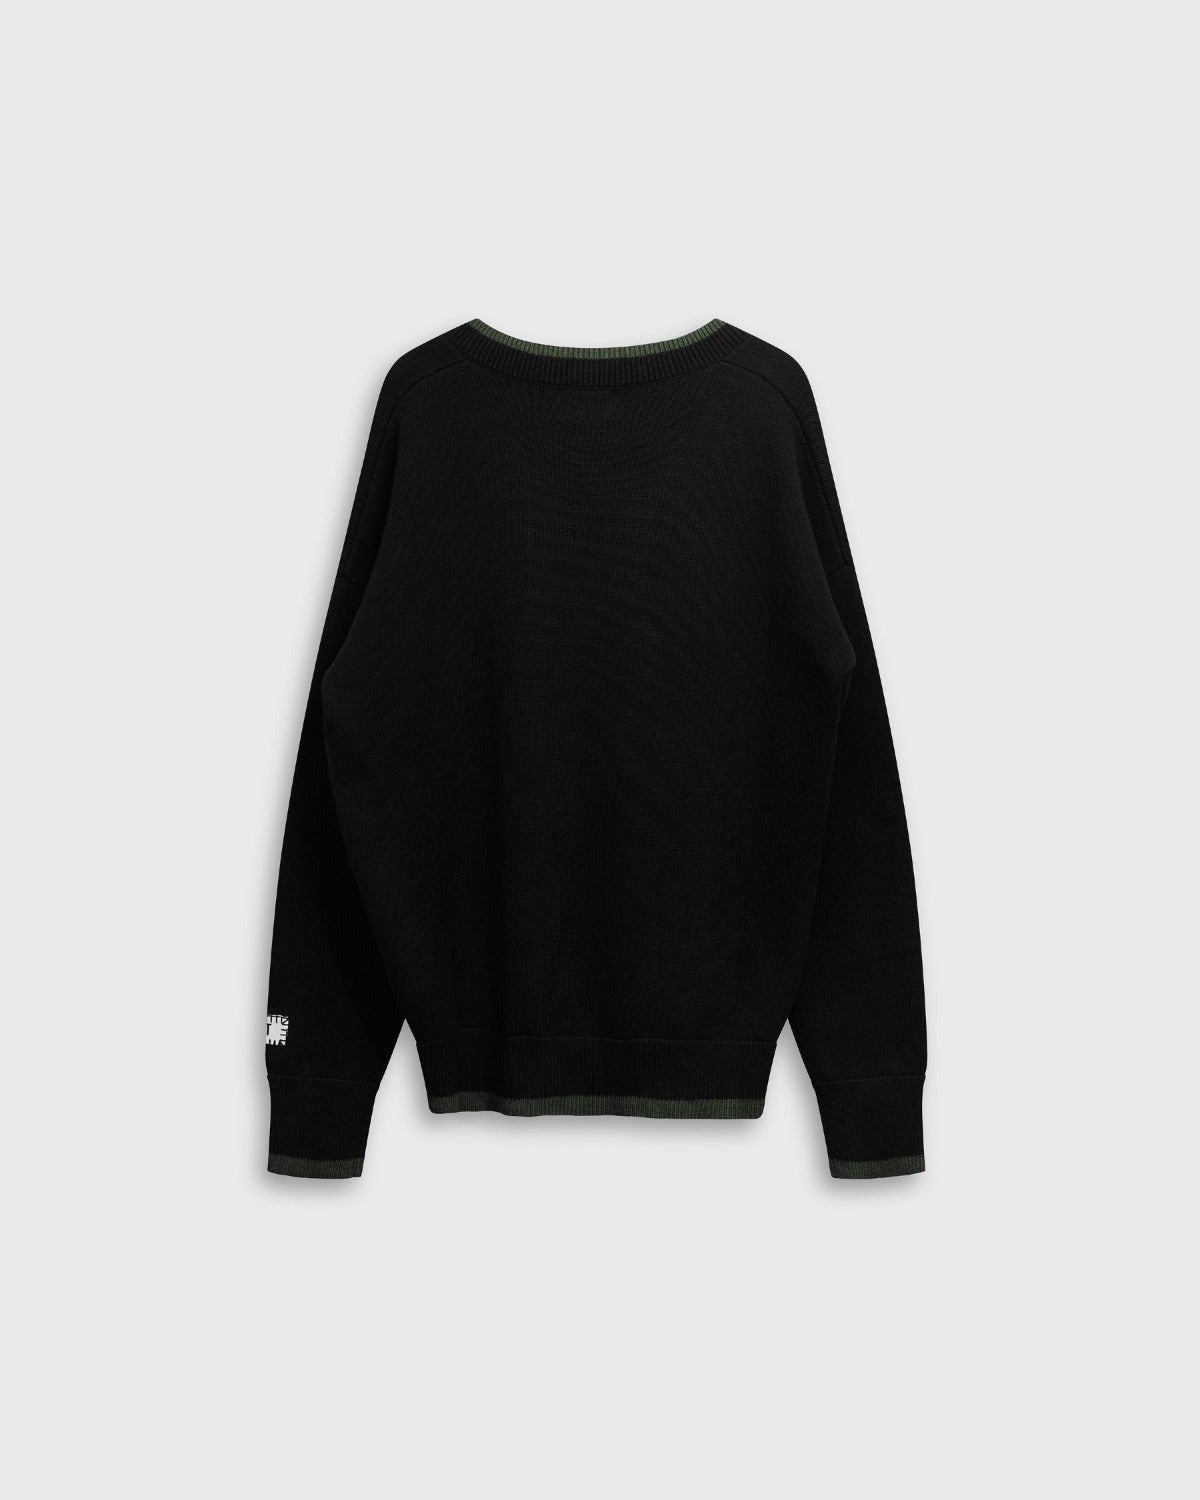 long sleeve black sweater oversized androgynous clothing by Krostfit 